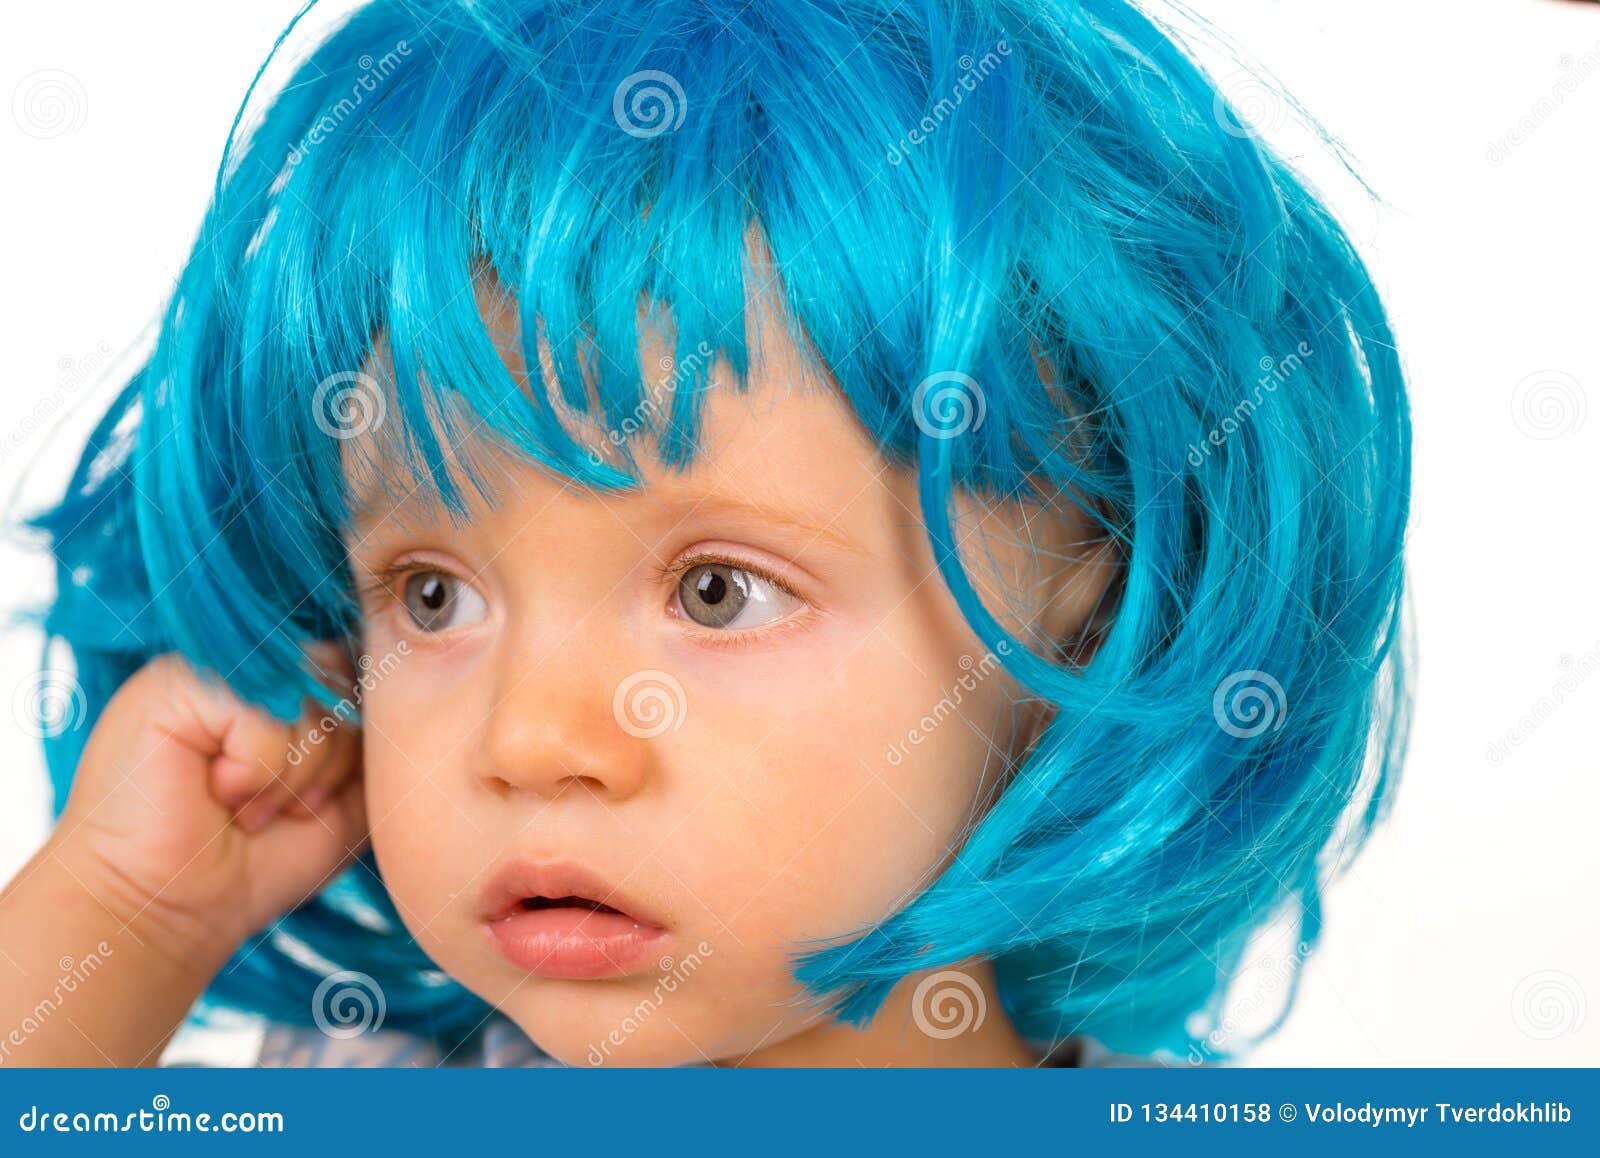 5. "Blue Hair Dye for Babies" - wide 7